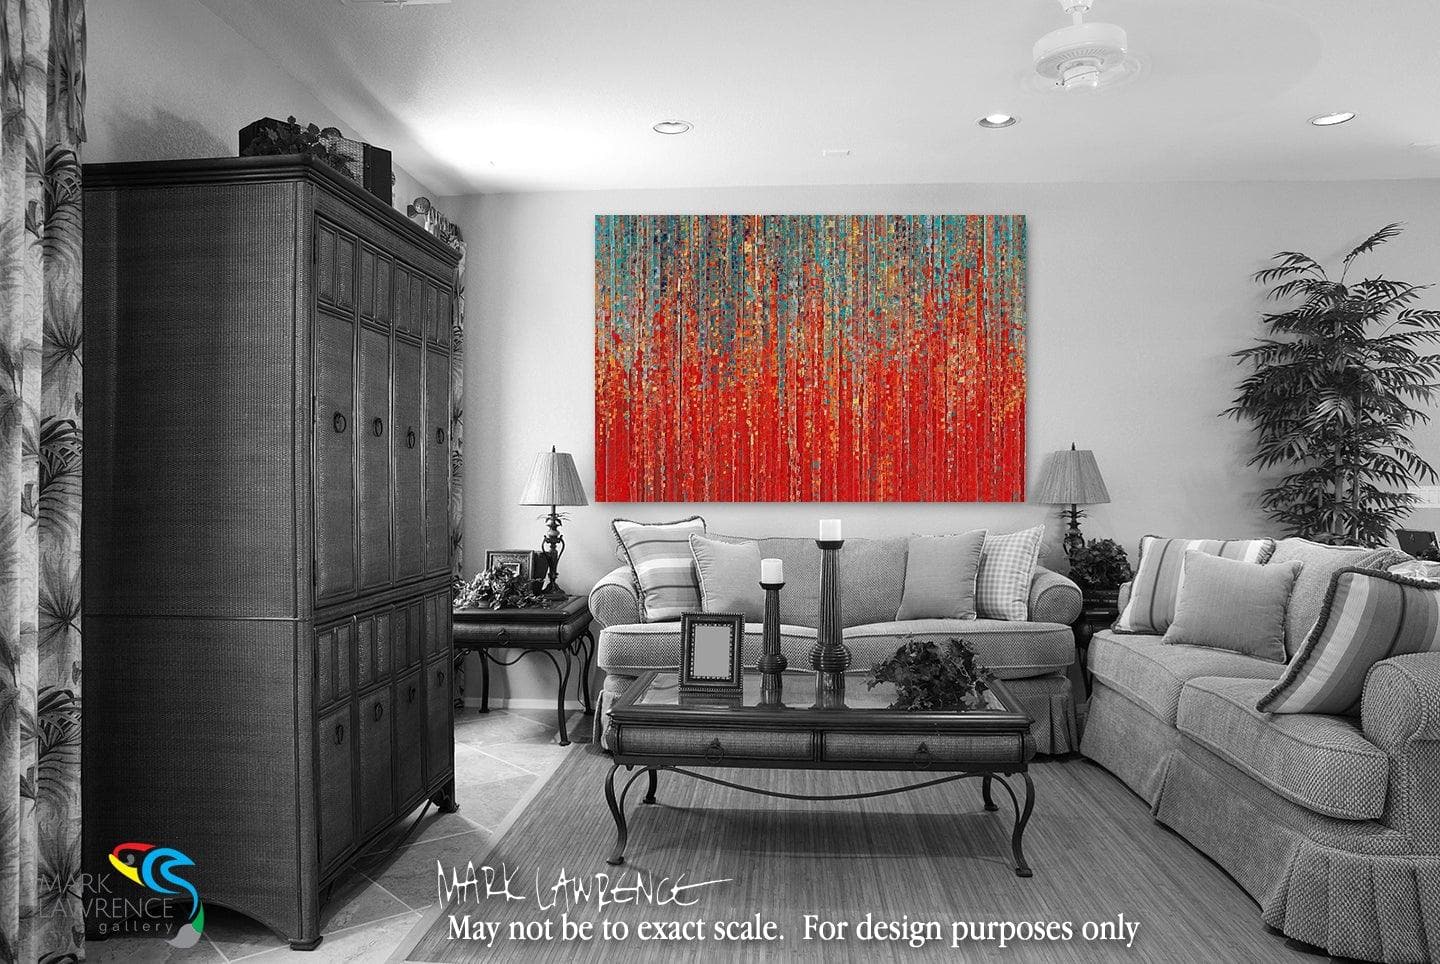 Interior Design Inspiration. 3 John 1:4. Walk In Truth. Limited Edition Christian Modern Art. Ultra-hand embellished and textured with rich brush strokes by the artist. Signed & numbered brightly colored textured Christian abstract art. Find Art That Speaks To You! I have no greater joy than to hear that my children walk in truth. 3 John 1:4